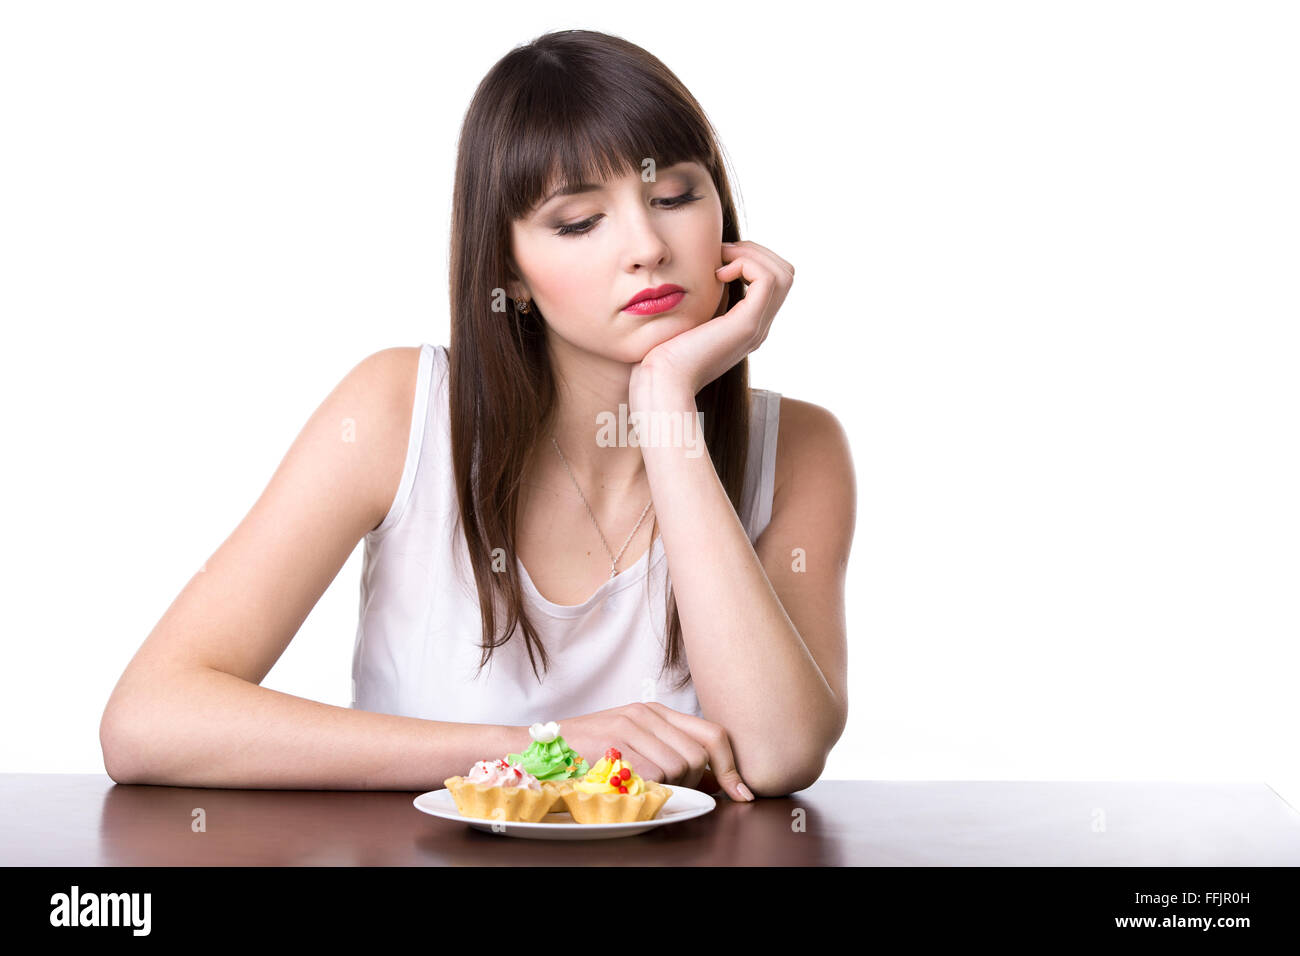 Young dieting woman sitting in front of plate with delicious cream tart cakes in dough baskets, looking at sweet dessert Stock Photo